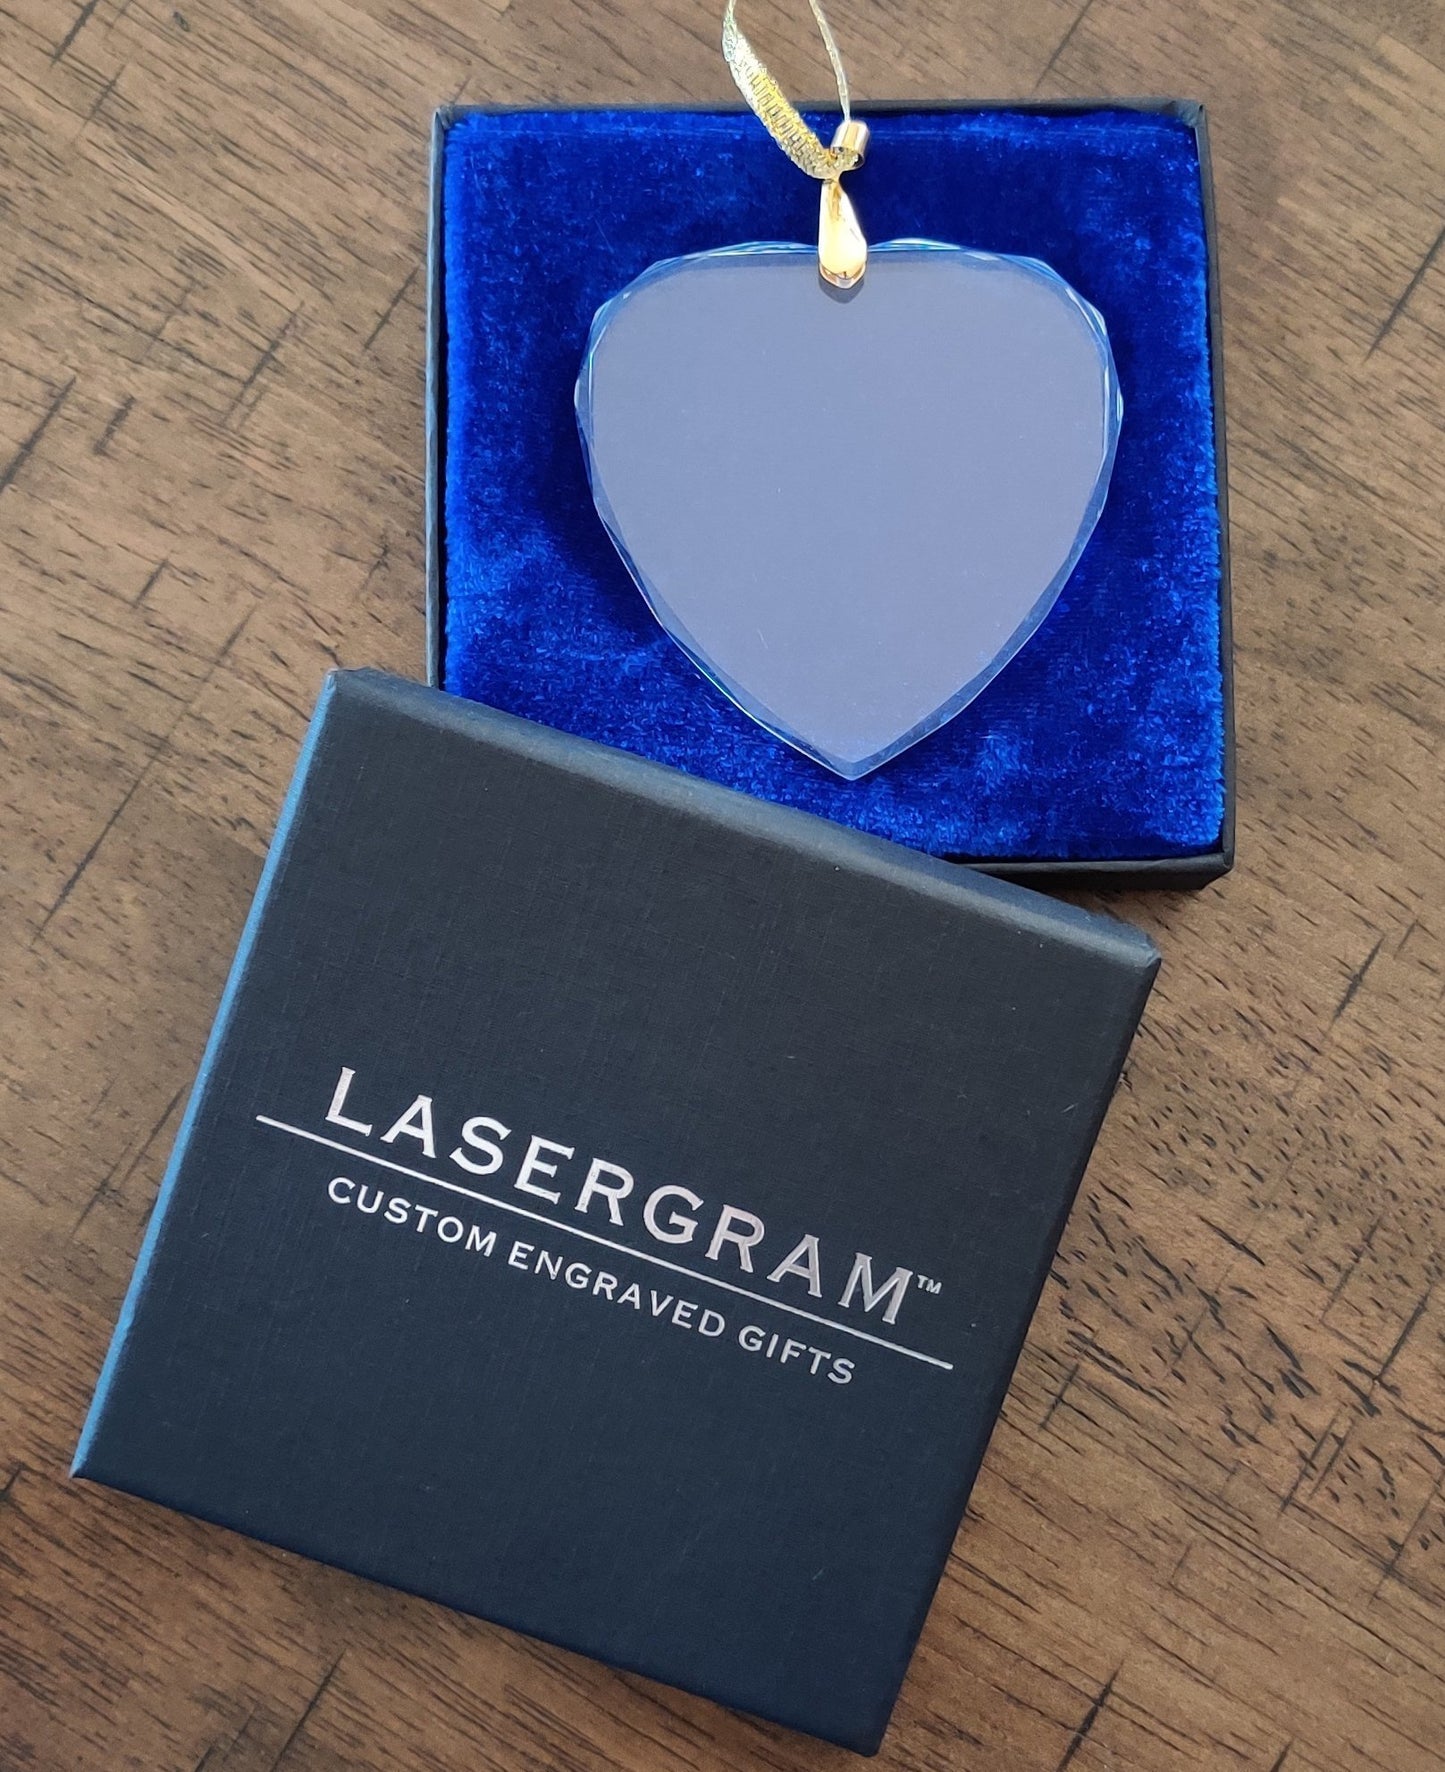 LaserGram Christmas Ornament, Flag of Puerto Rico, Personalized Engraving Included (Heart Shape)